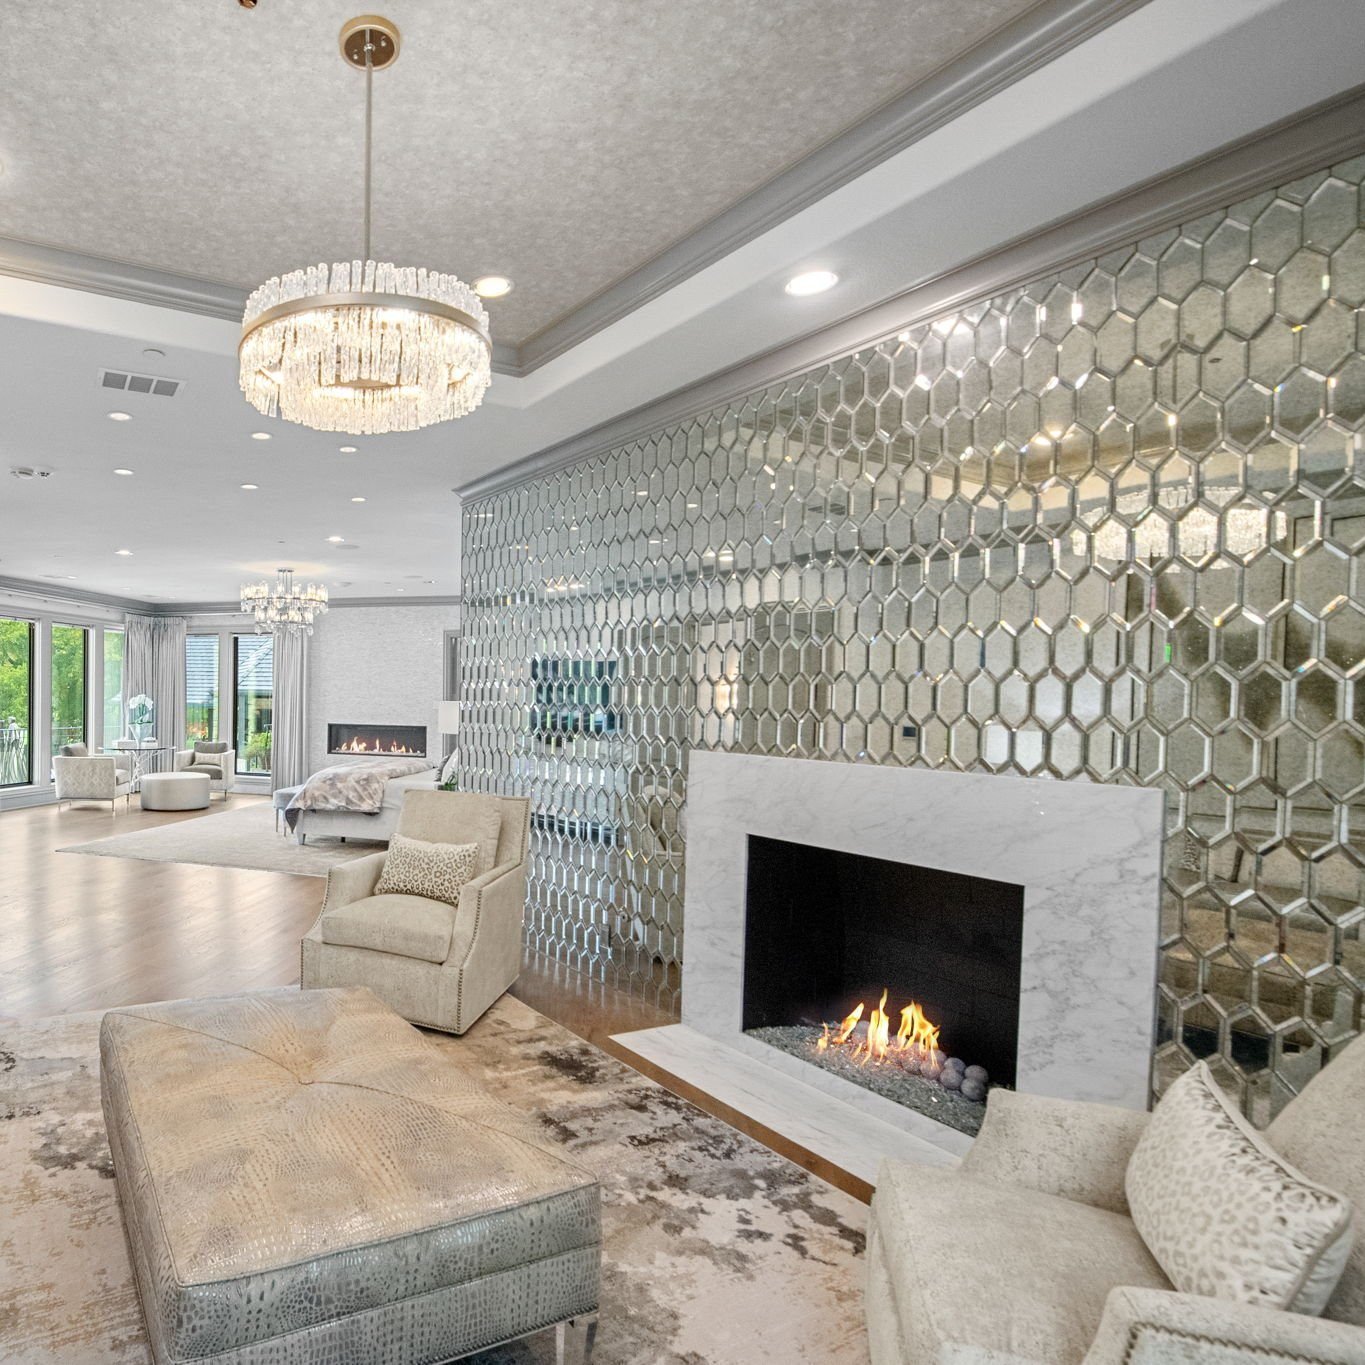 Get ready to polish your interior spaces with a touch of mirrored magic! Our team loves to add elements of glitz and glam to every project, and the show-stopping accent walls shown here are no exception! Similar to how a dazzling necklace with precio